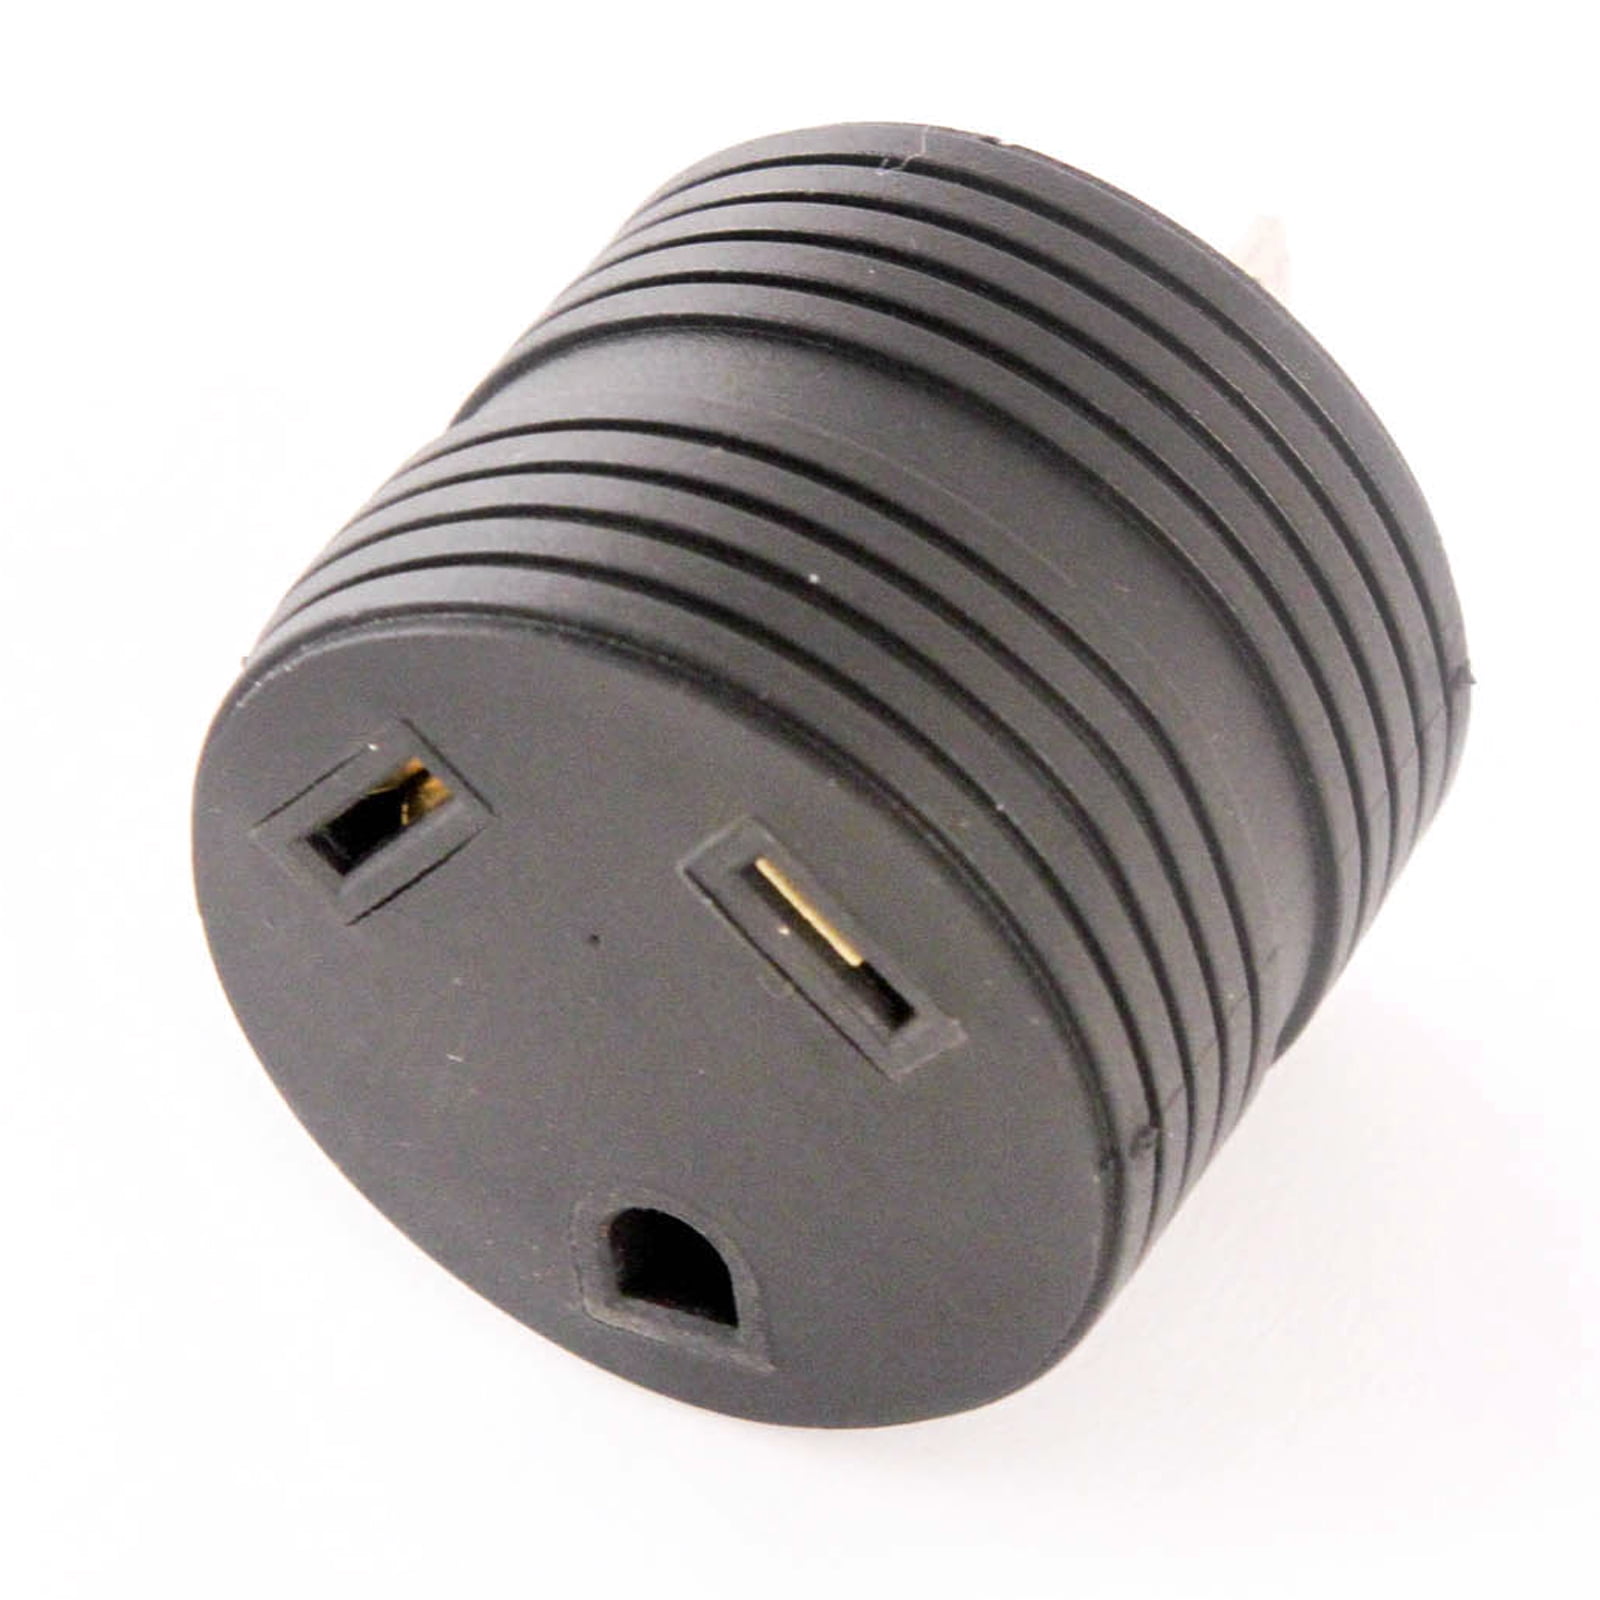 RV Electrical Adapter 30 Amp Male to 15 A Female Plug Round Grip Motorhome 